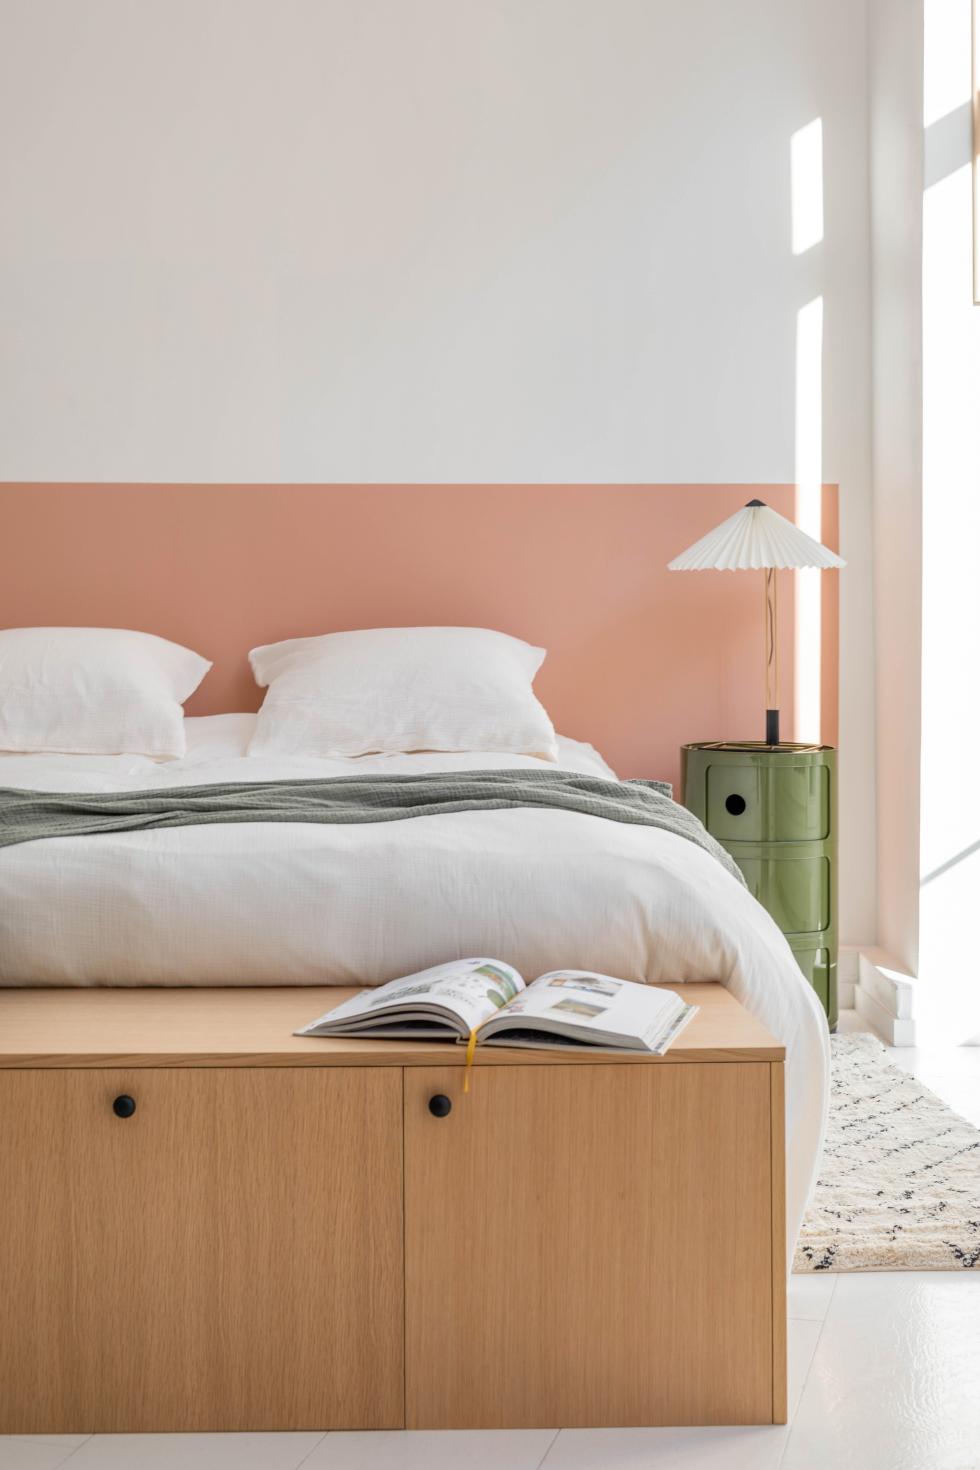 Project carried out by the Plum studio with our Blush paint - ⓒ Hervé Goluza for Plum